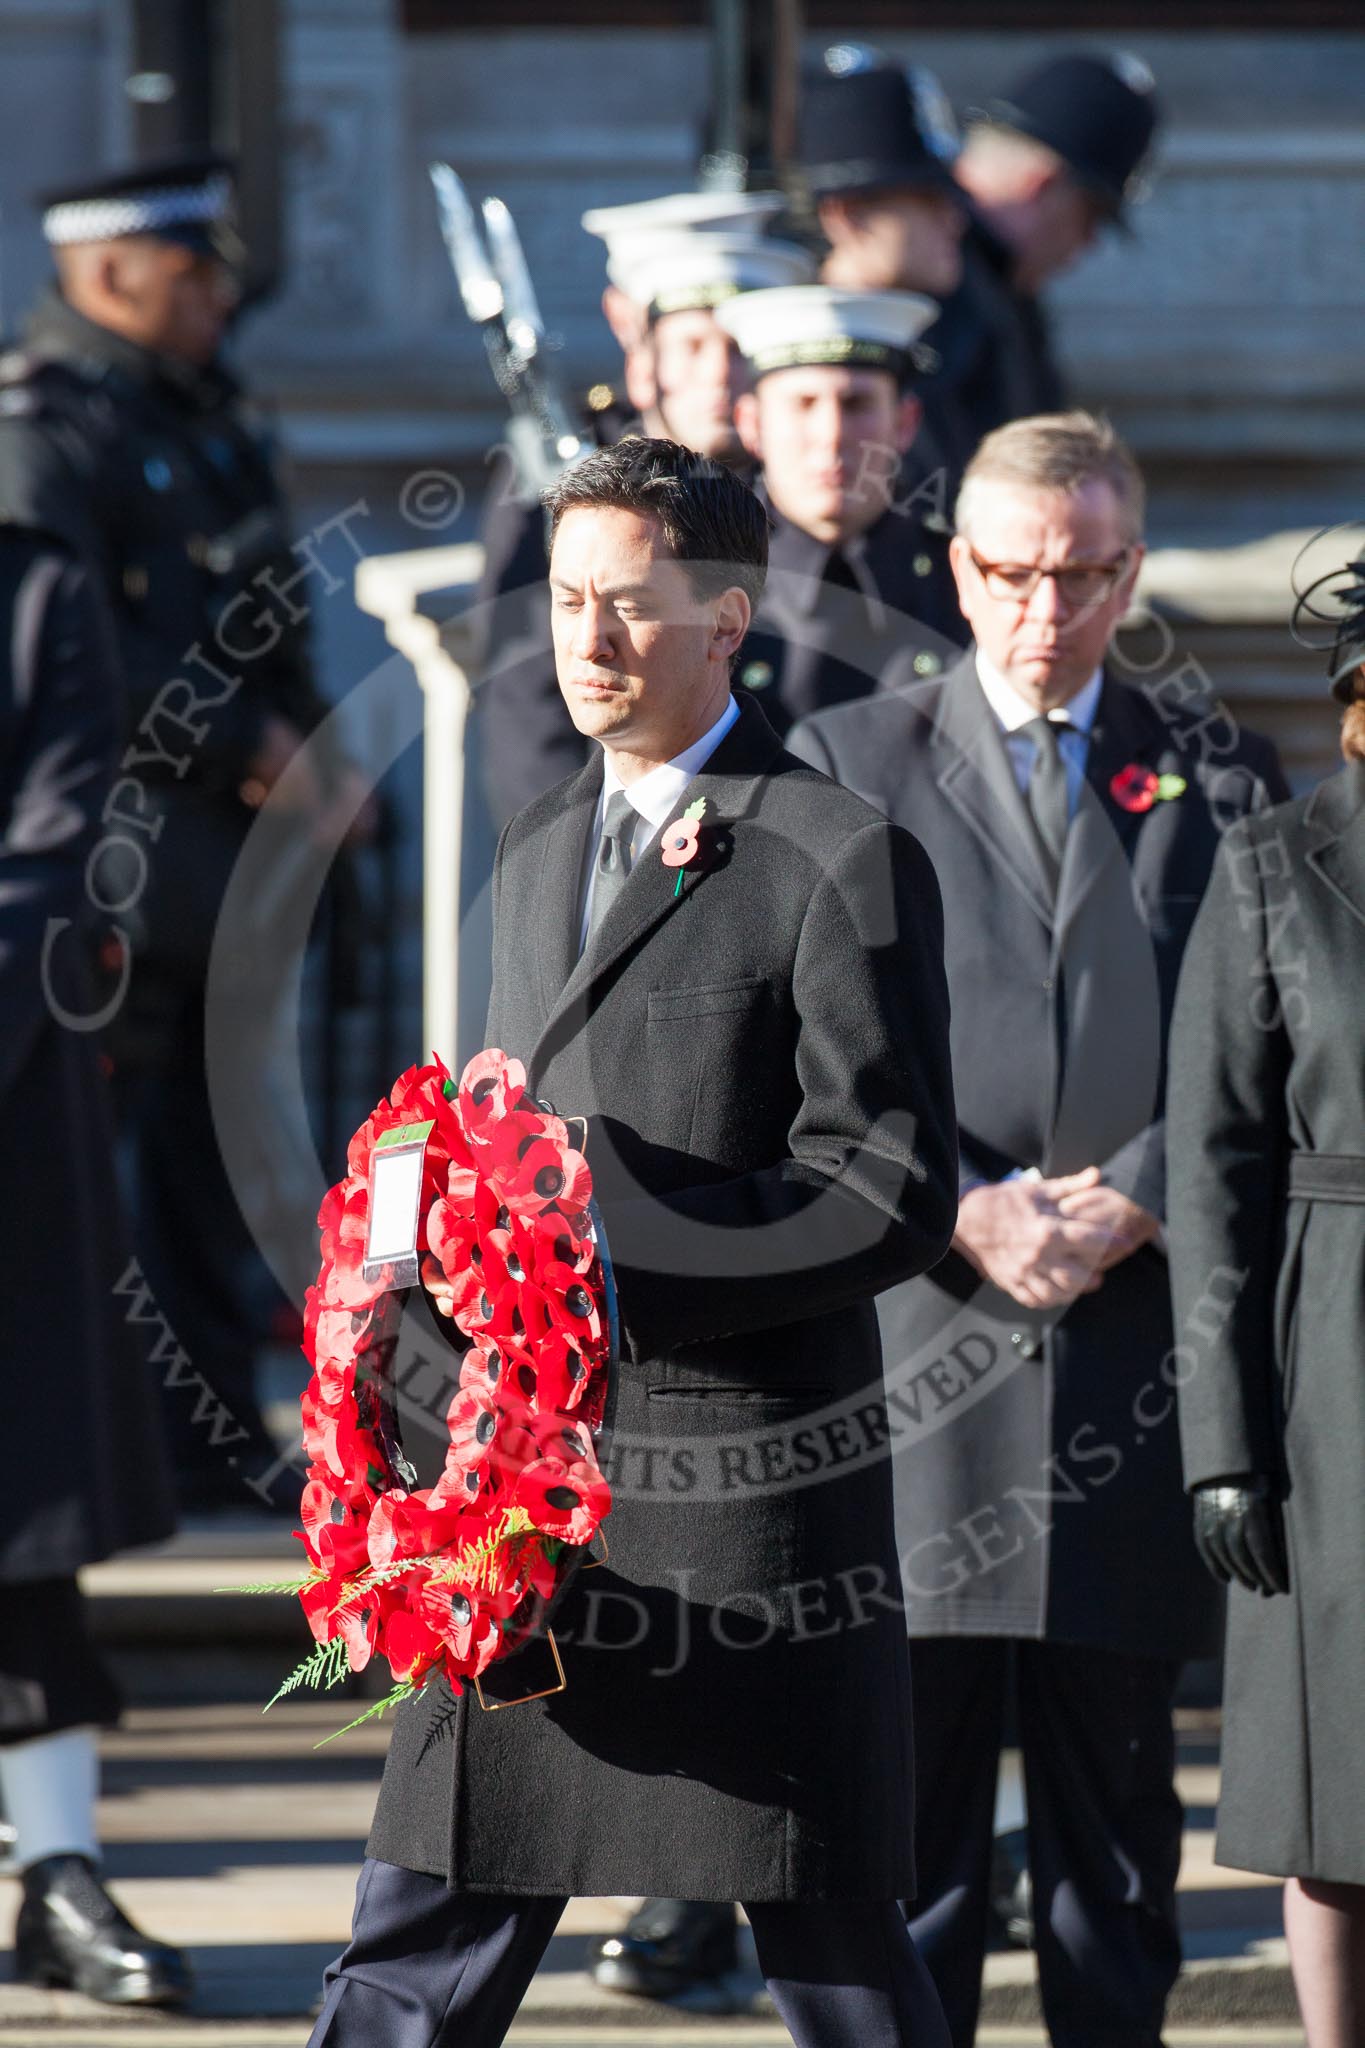 Ed Miliband, as Leader of the Opposition, about to lay a wreath at the Cenotaph.